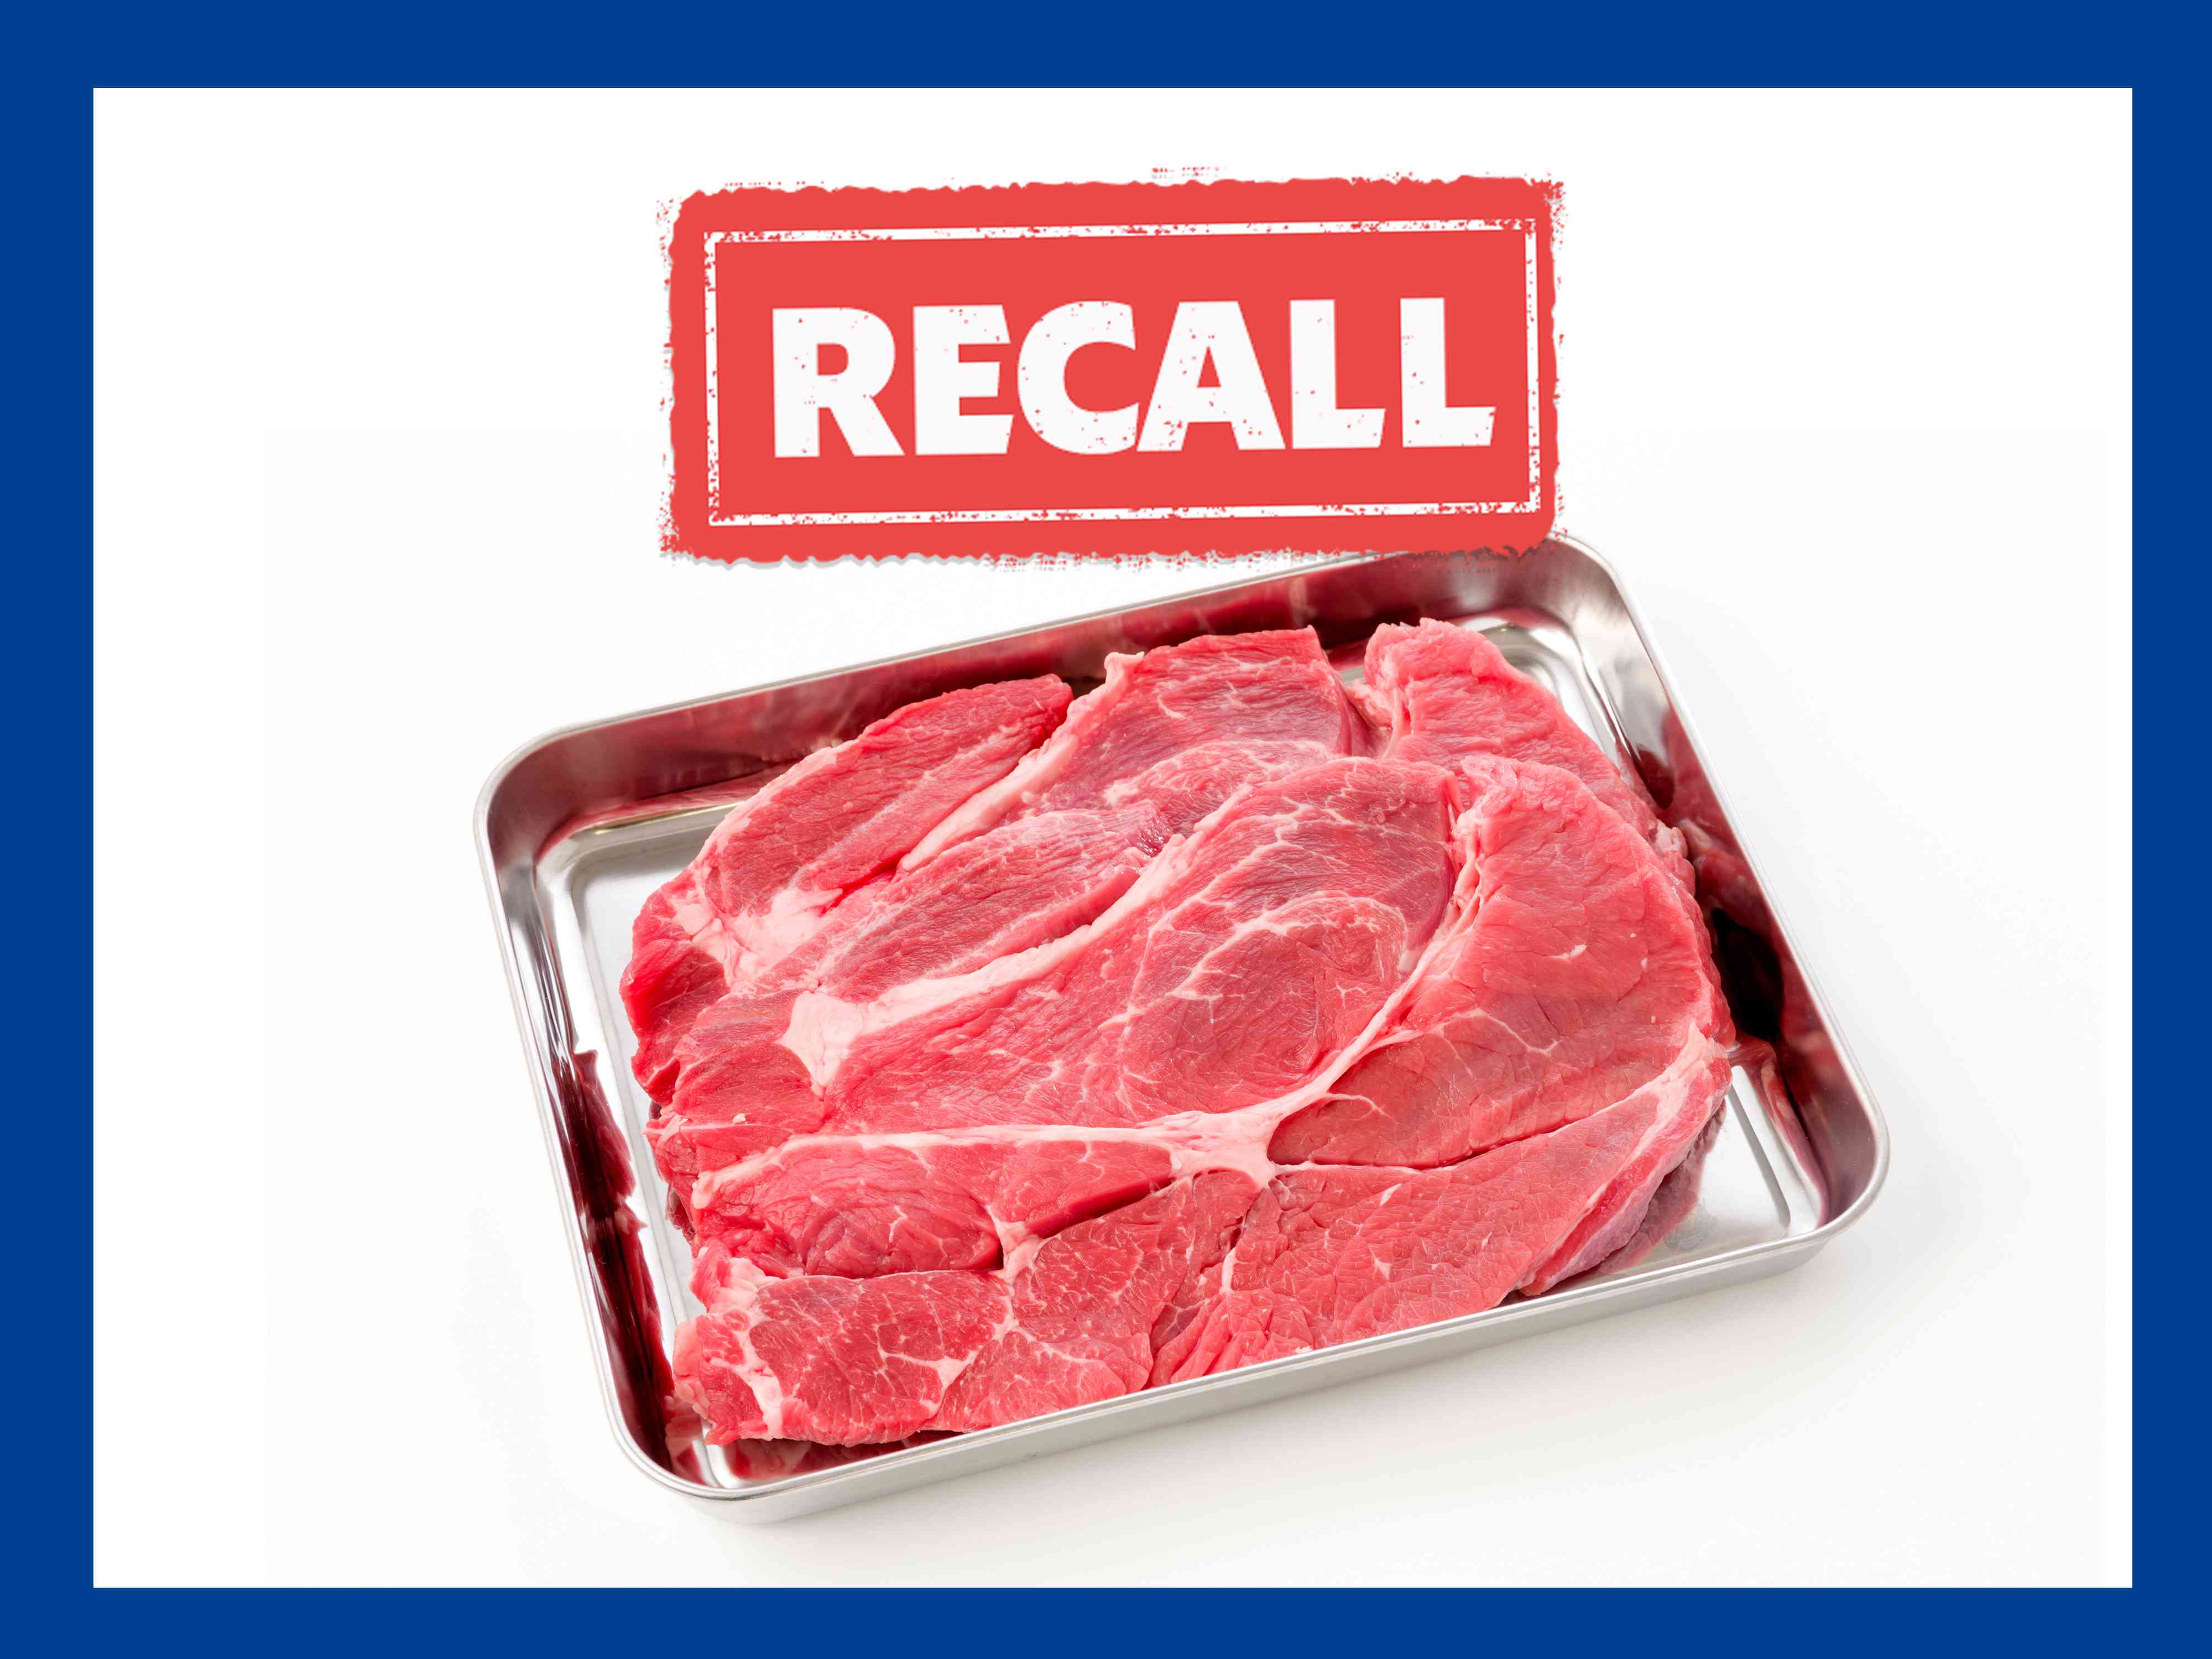 Over 20,000 Pounds of Raw Beef Products Recalled for Lack of Inspection